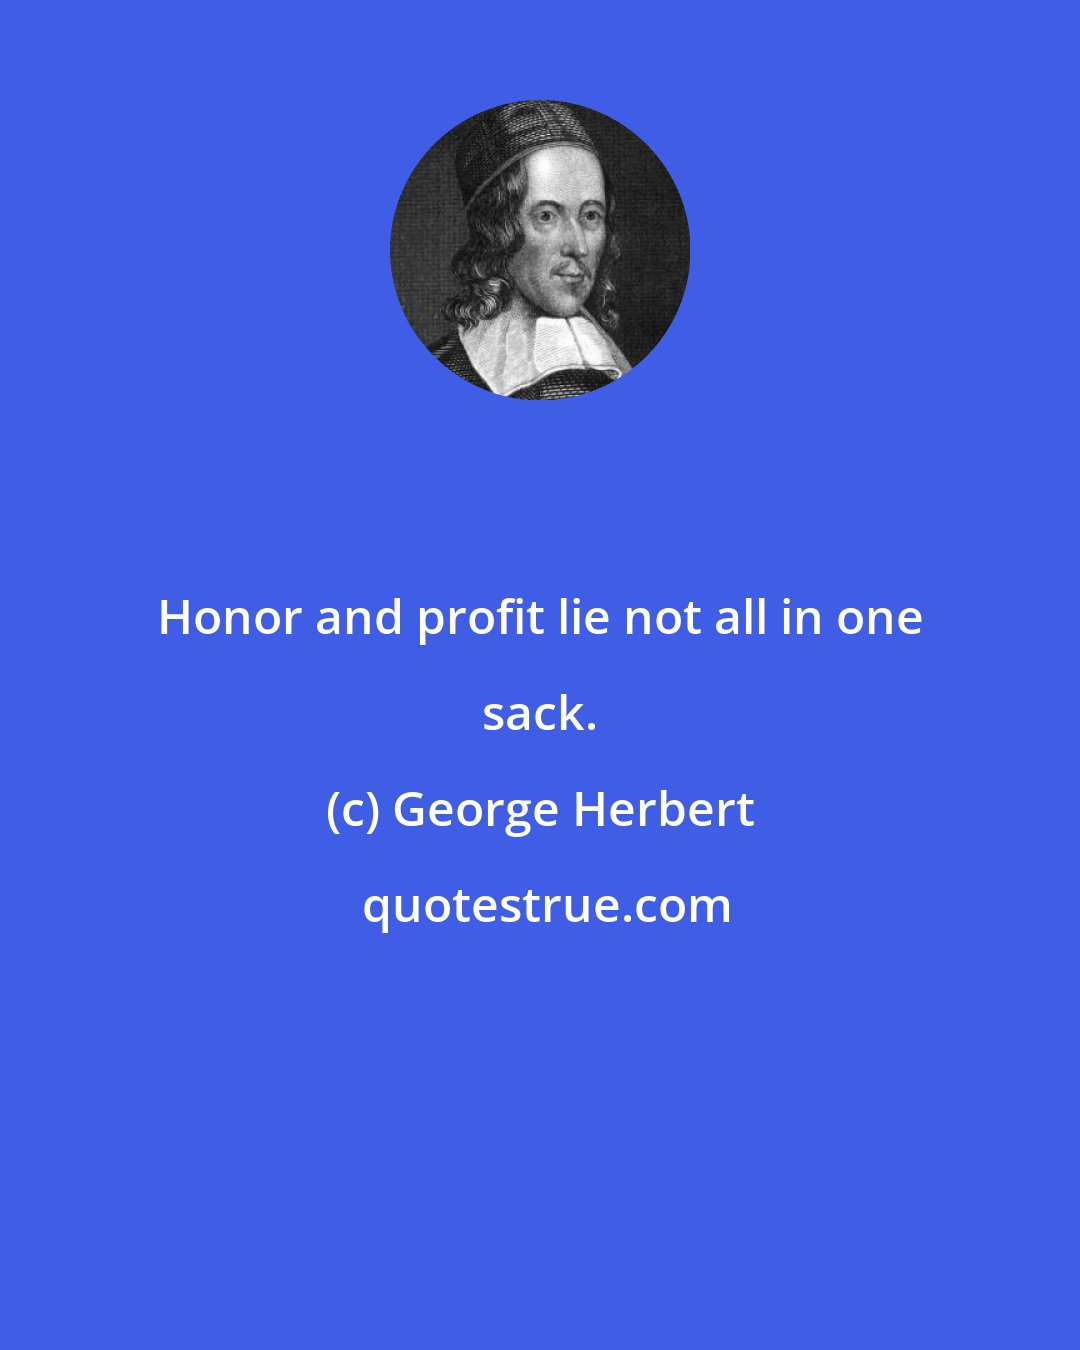 George Herbert: Honor and profit lie not all in one sack.